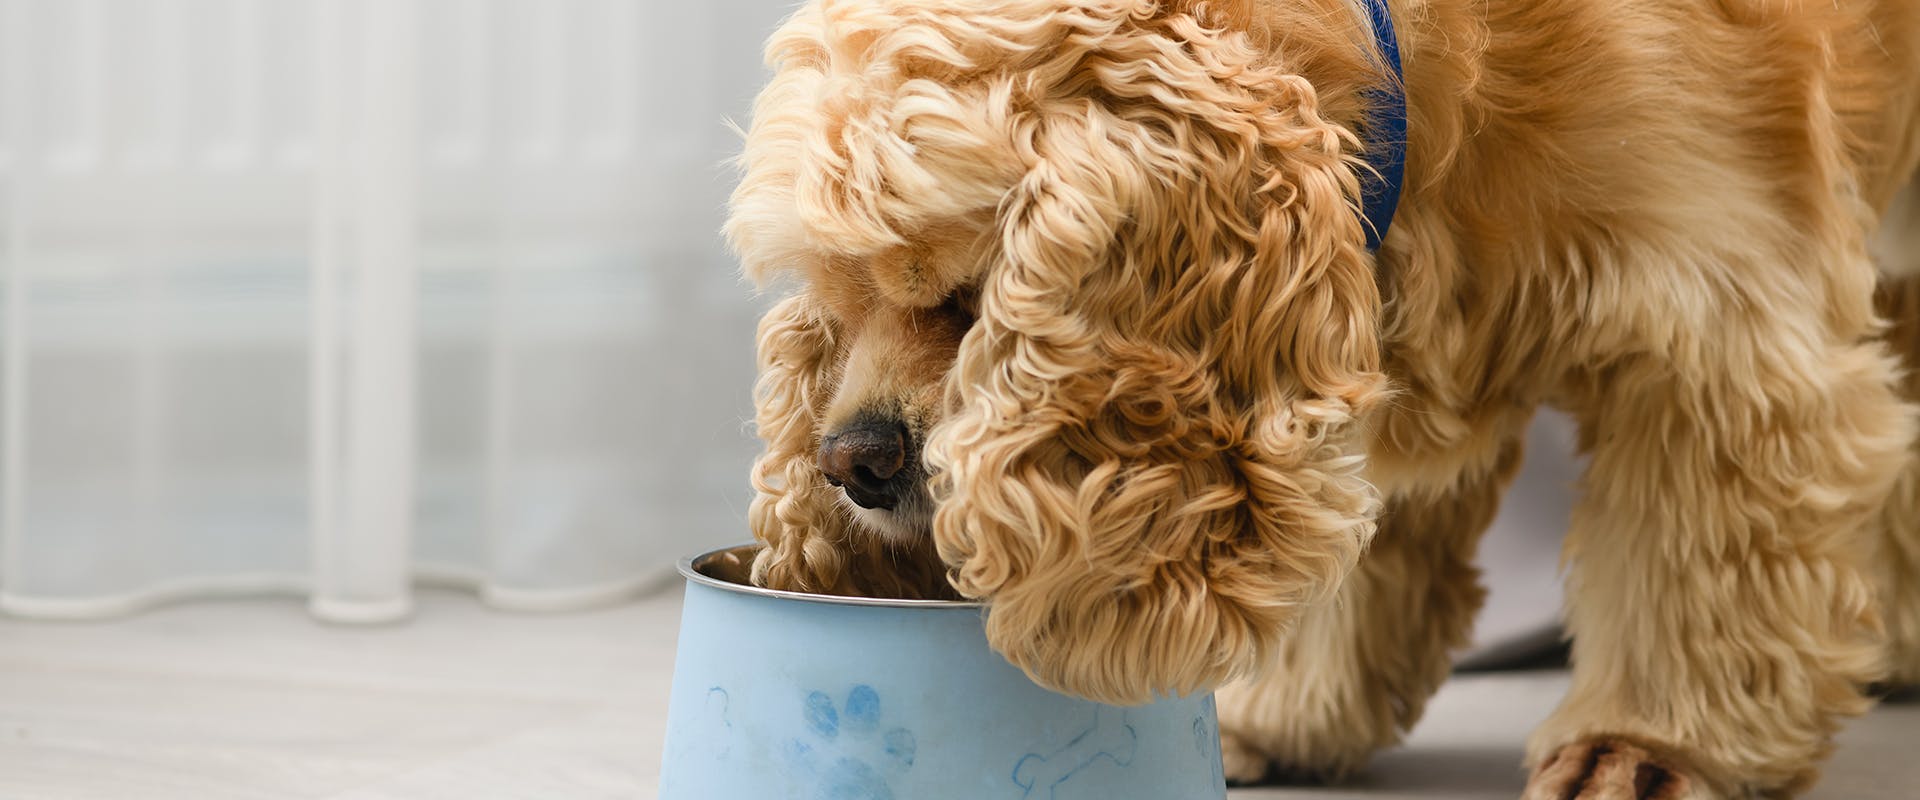 How much should I feed my dog? A fluffy dog eating from a blue dog bowl